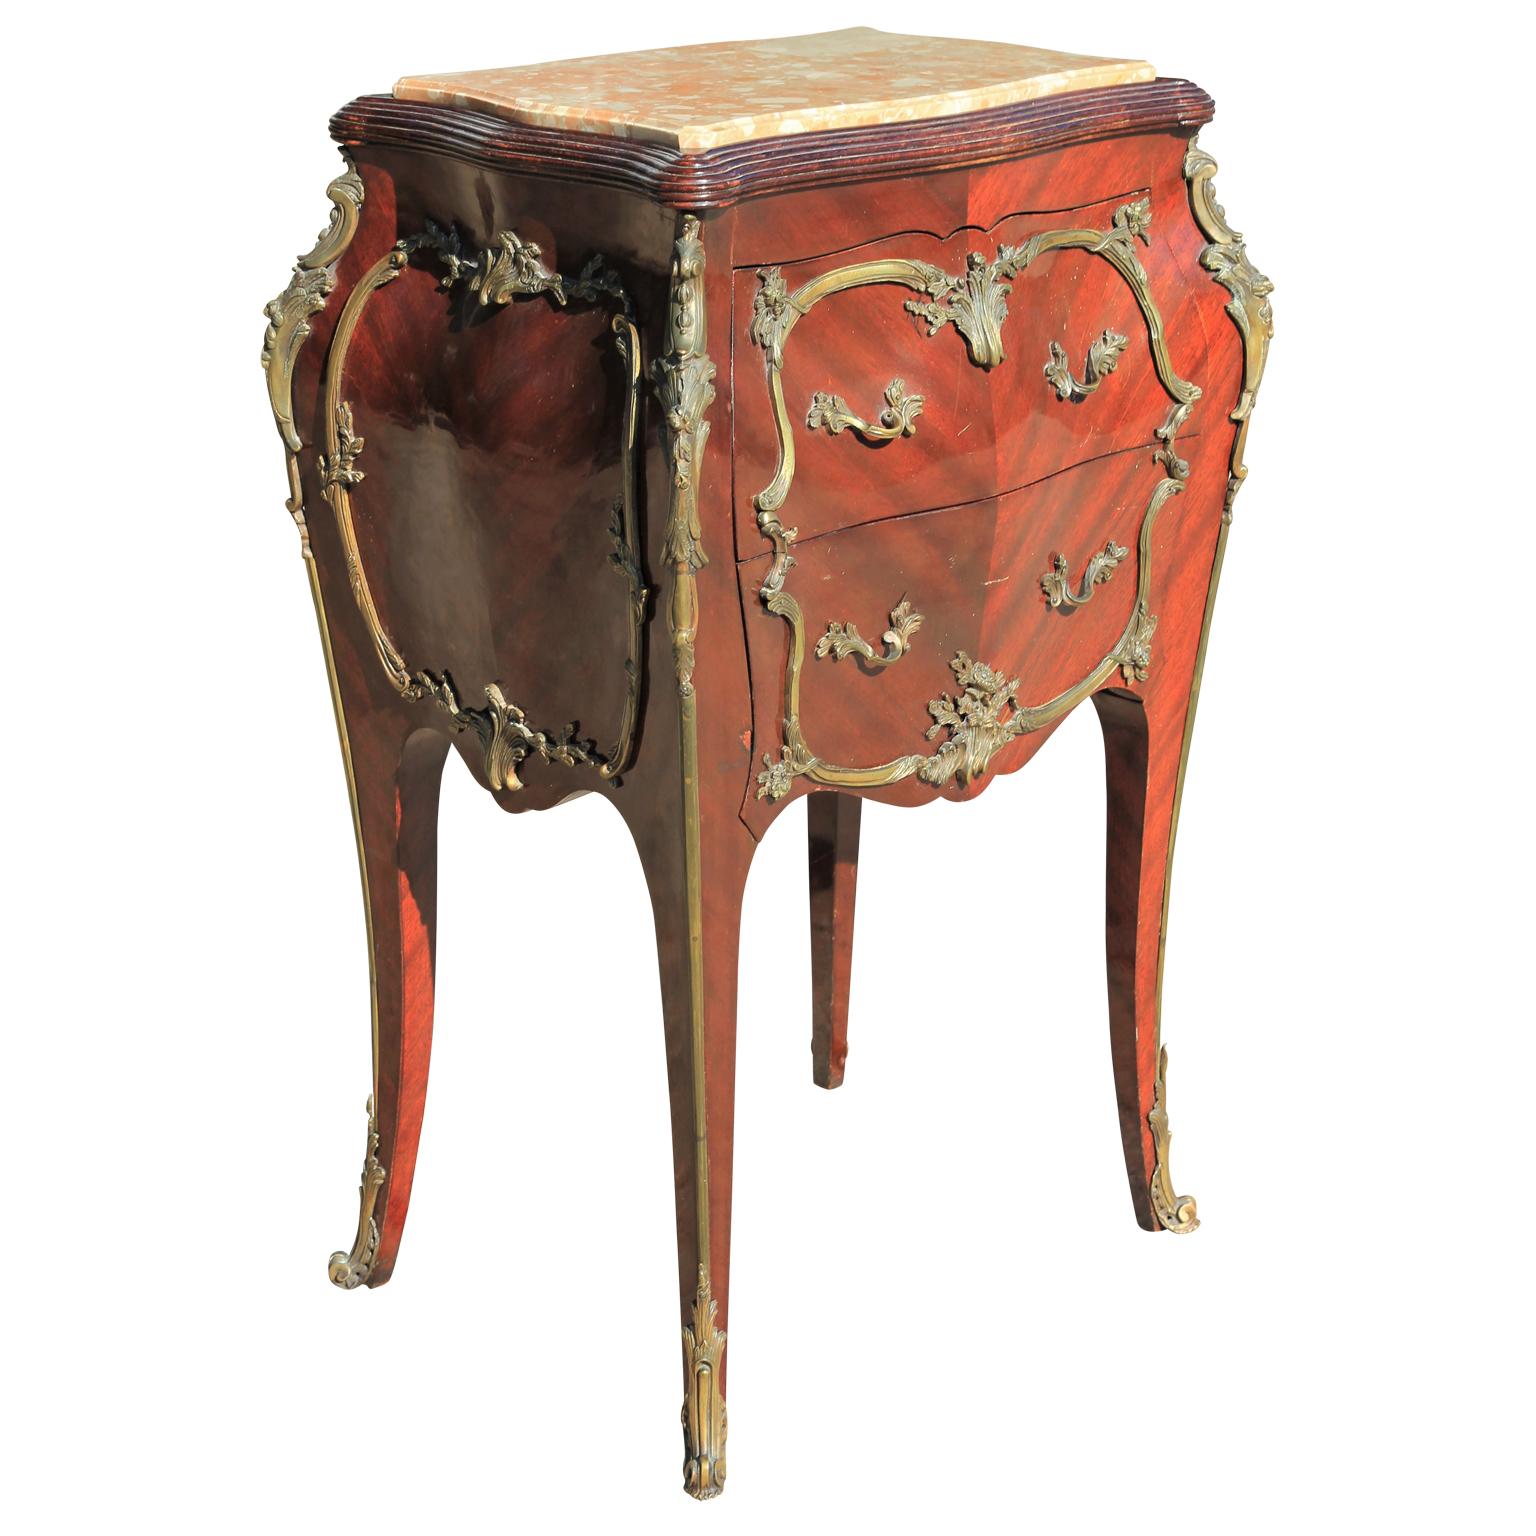 Lovely Bombé French Louis VXI style chest mounted in ornate bronze ormolu. Beautiful satin cut grain bookmatched, circa 1920s-1940s with a nice rose colored marble.